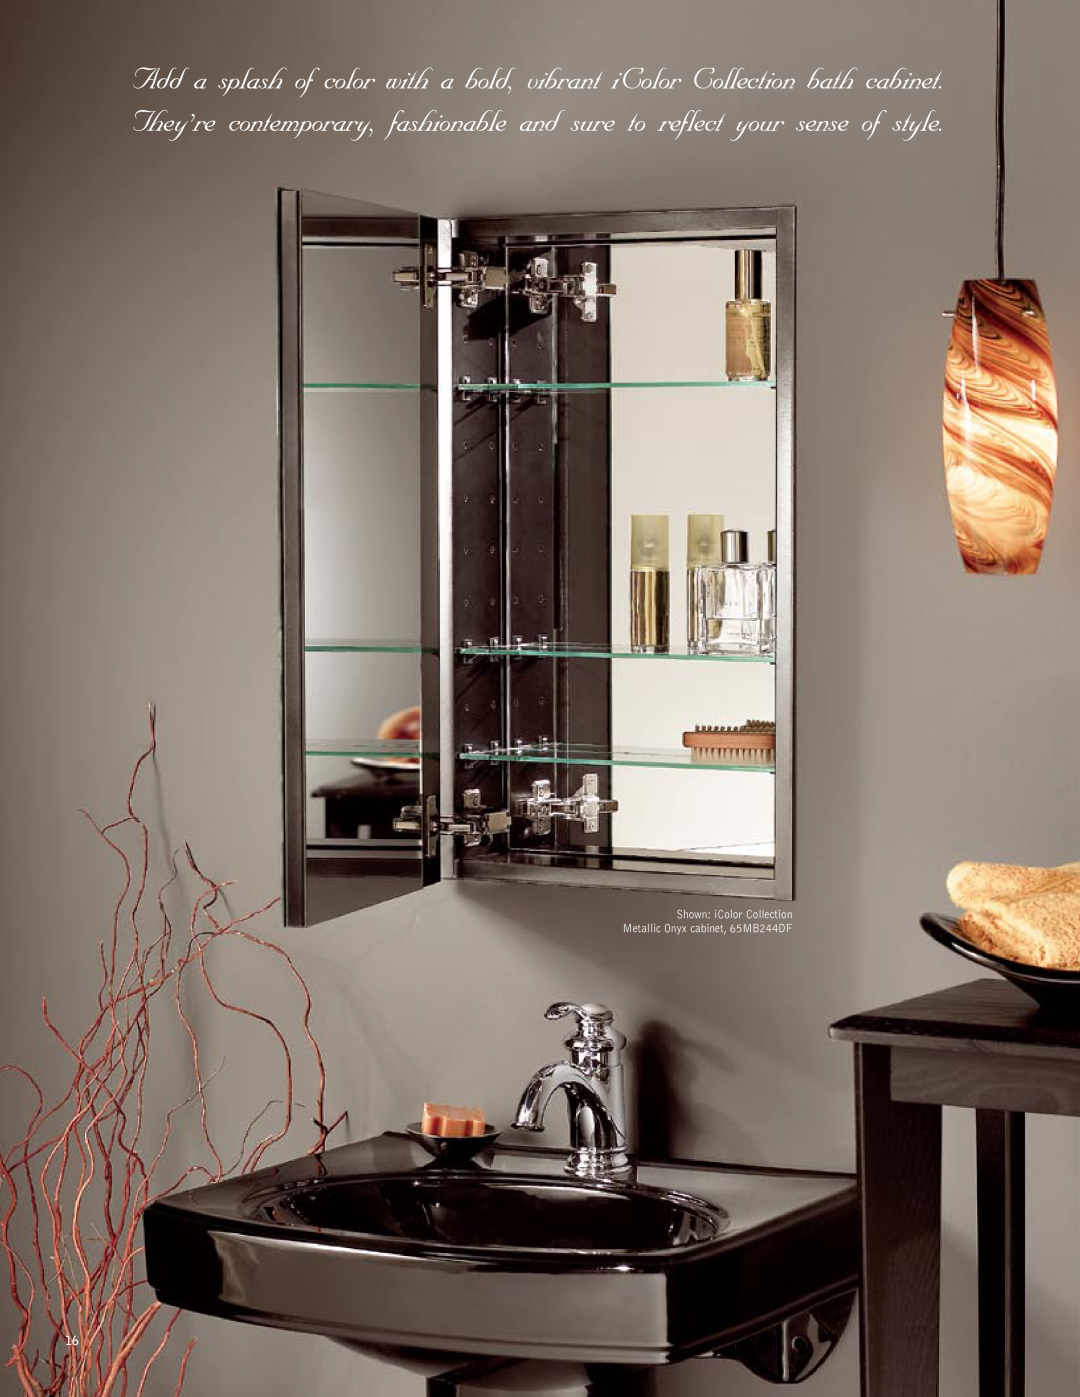 Broan Premier manual Shown iColor Collection, Metallic Onyx cabinet, 65MB244DF 